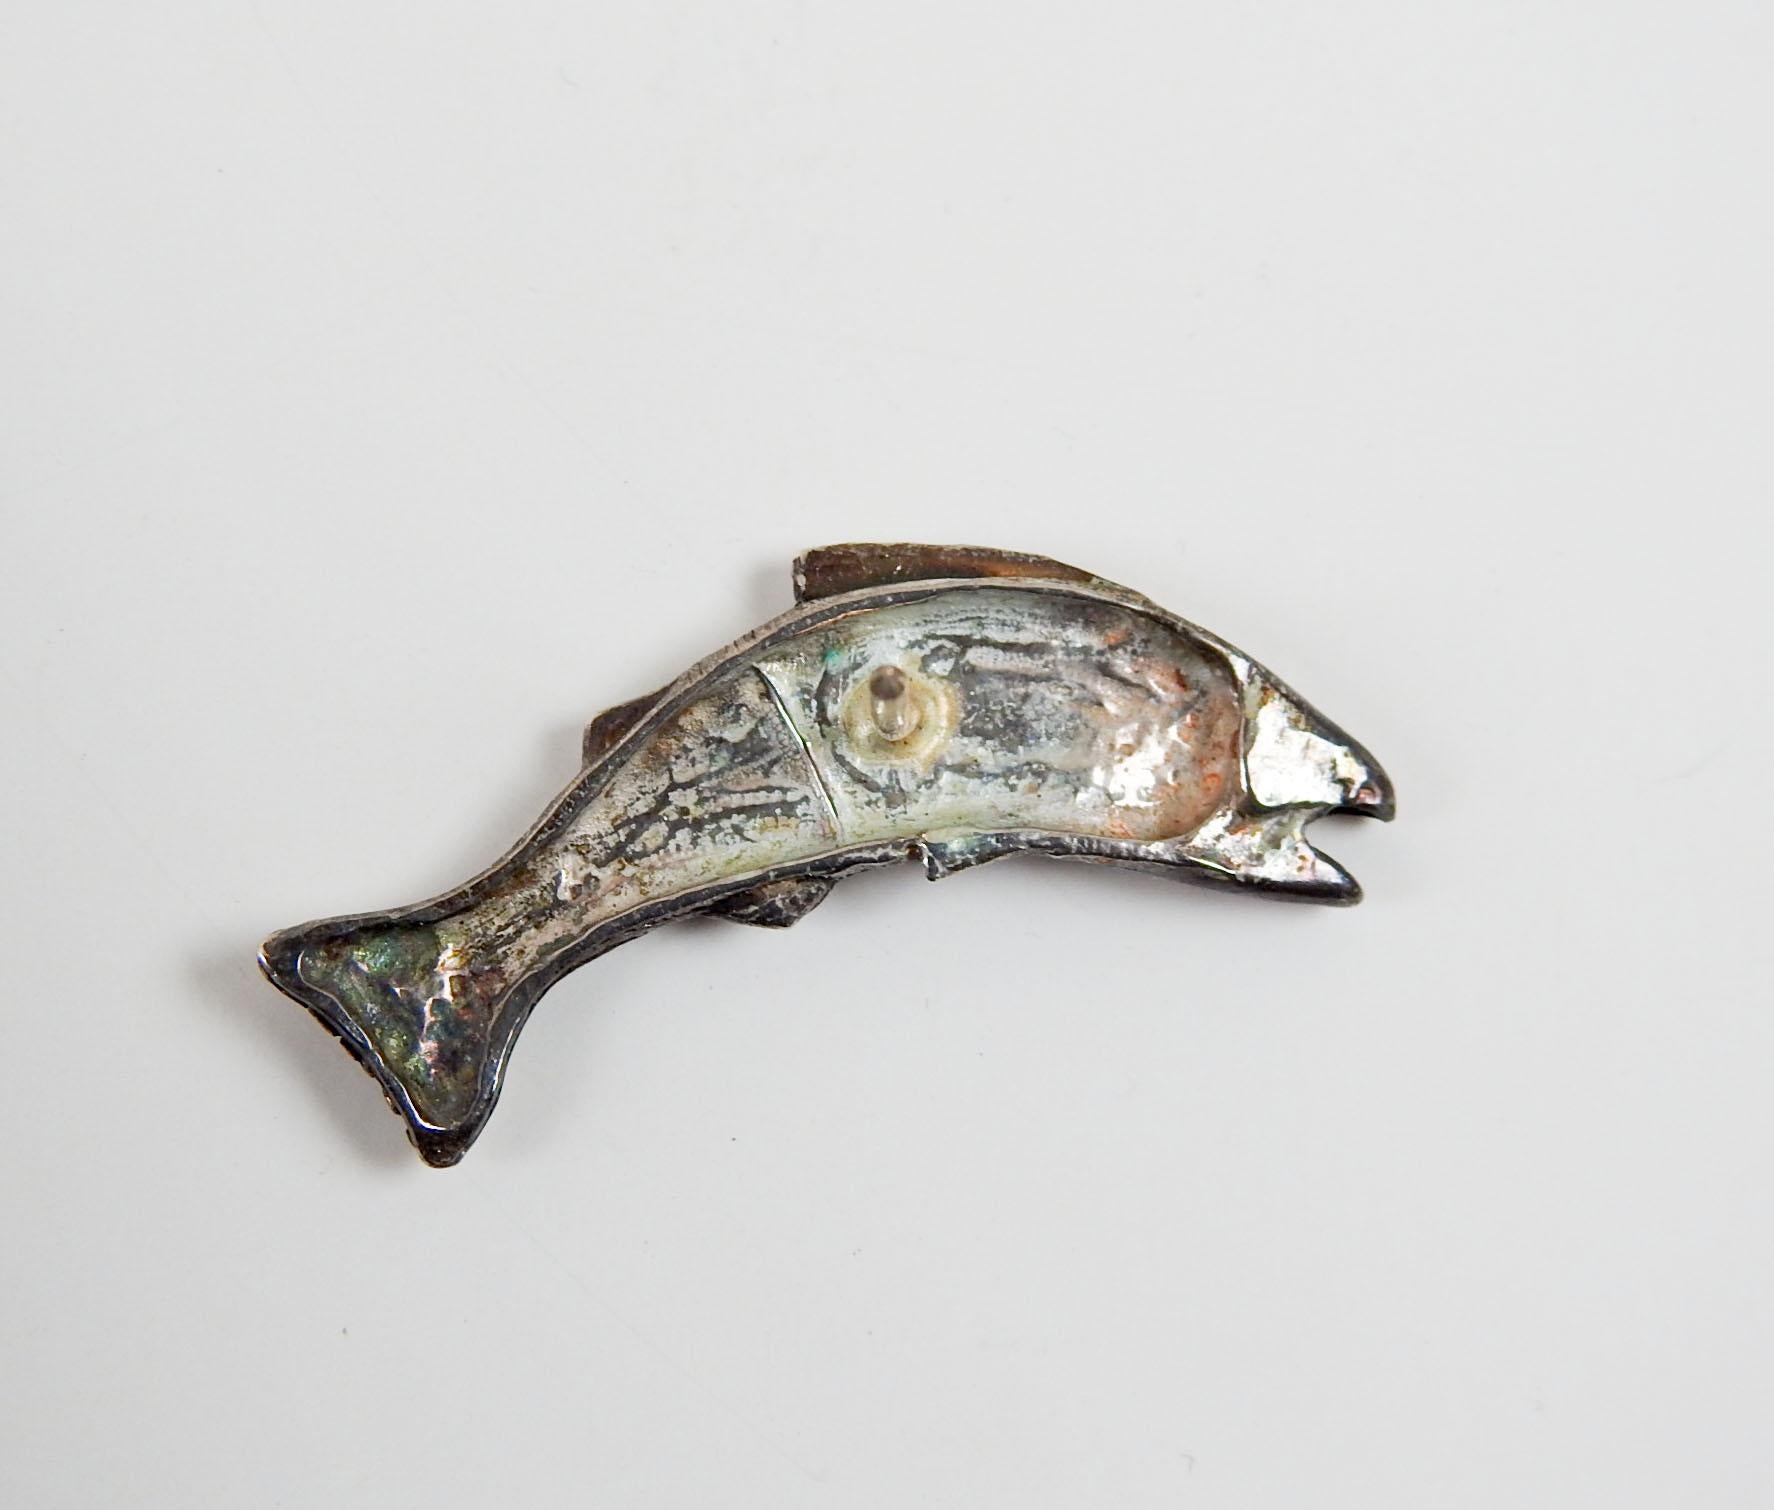 Late 20th century sculptural trout or salmon fish tie tack. No markings, but looks to be artist studio made, cast silver with tiny areas of gold overlay on tail, fins and eye. Great texture and movement, very good condition.